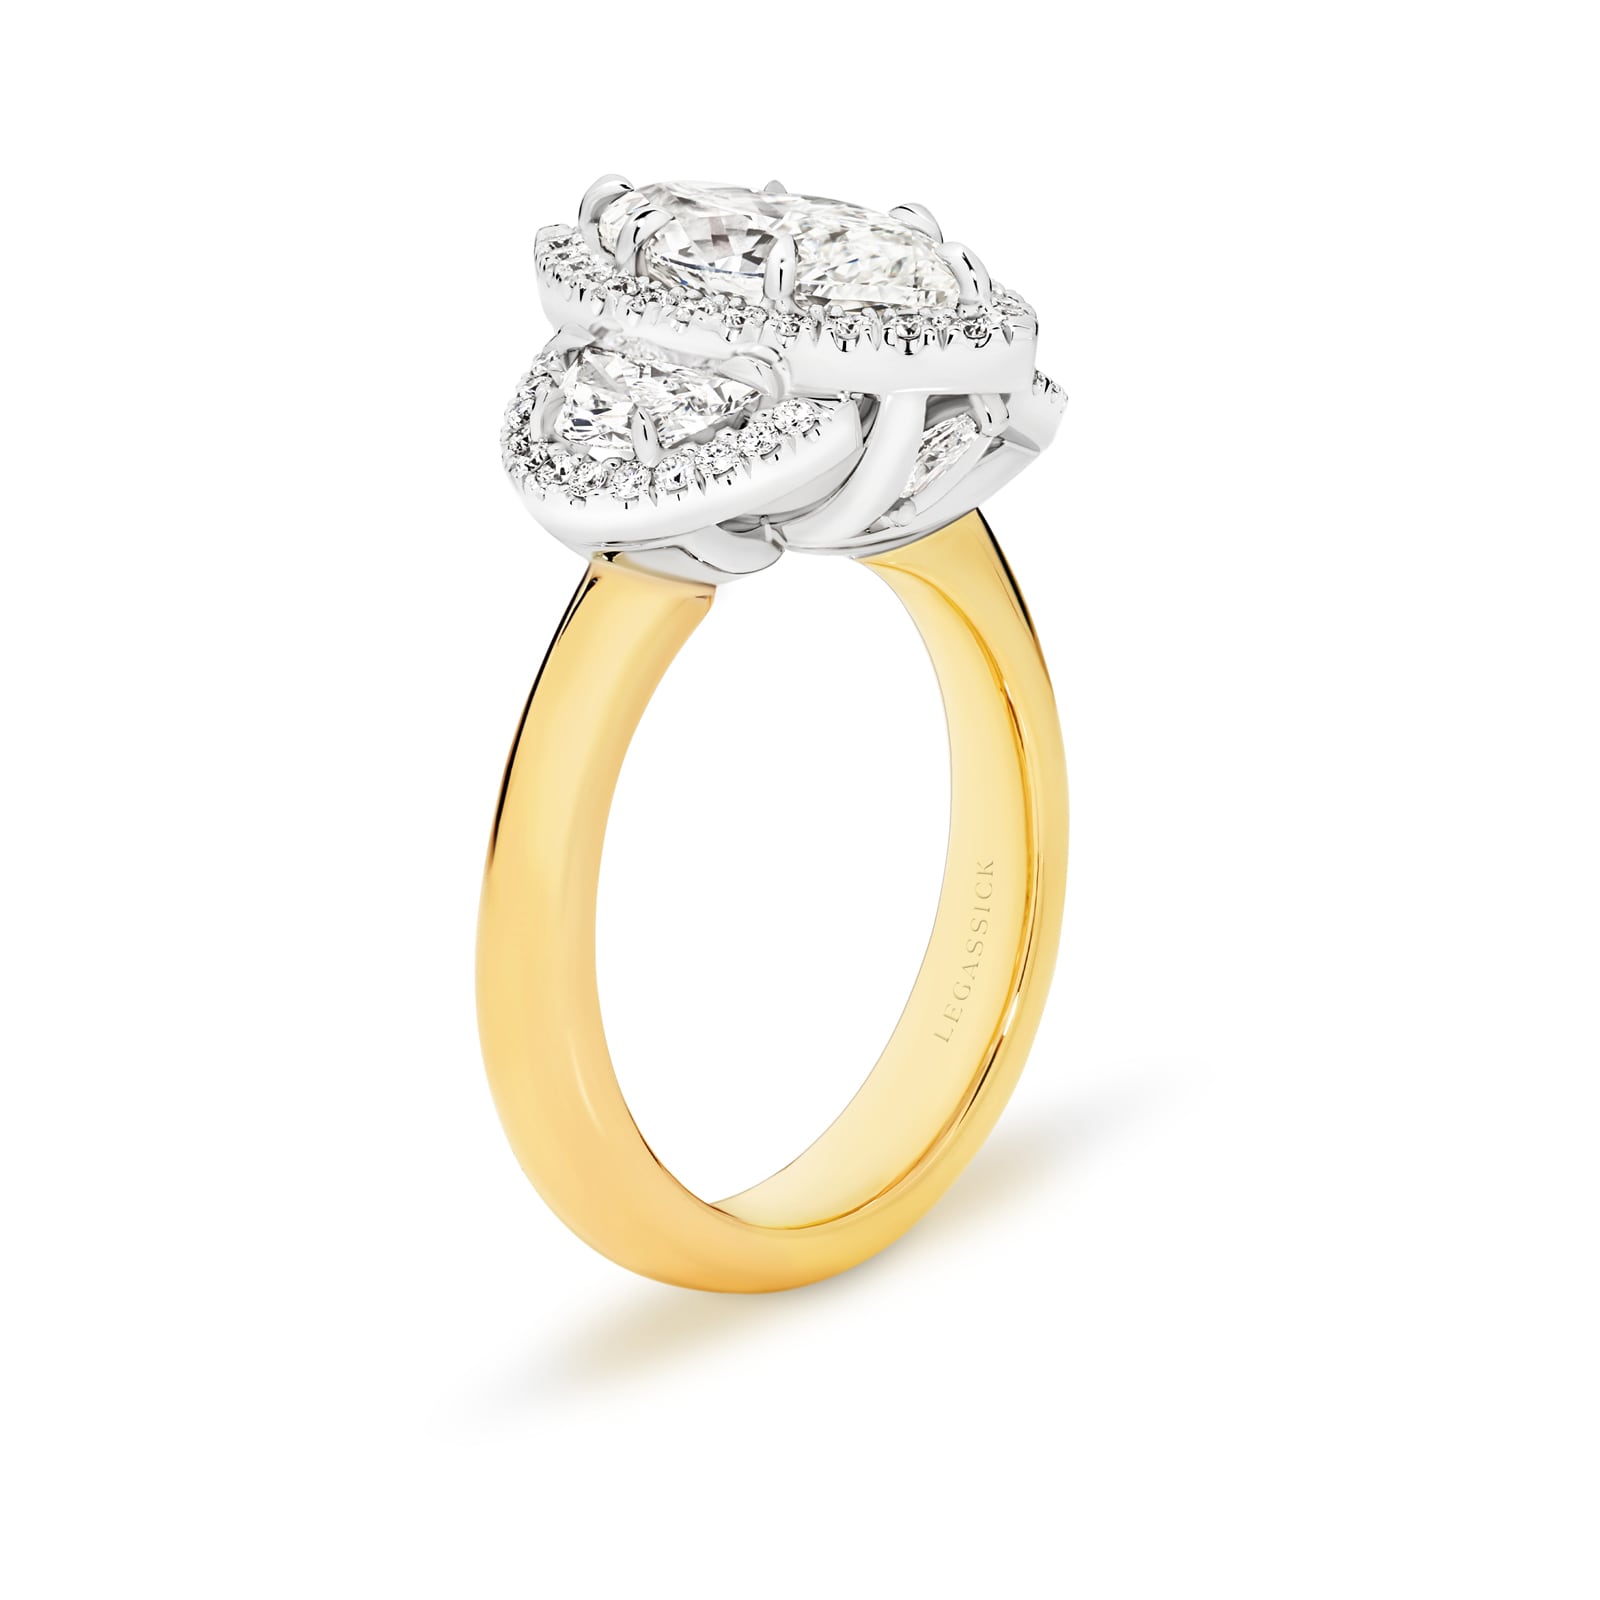 Monique is a stunning diamond ring with a 2ct marquise cut centre stone. She was designed and handcrafted by LeGassick's Master Jewellers, Gold Coast, Australia.